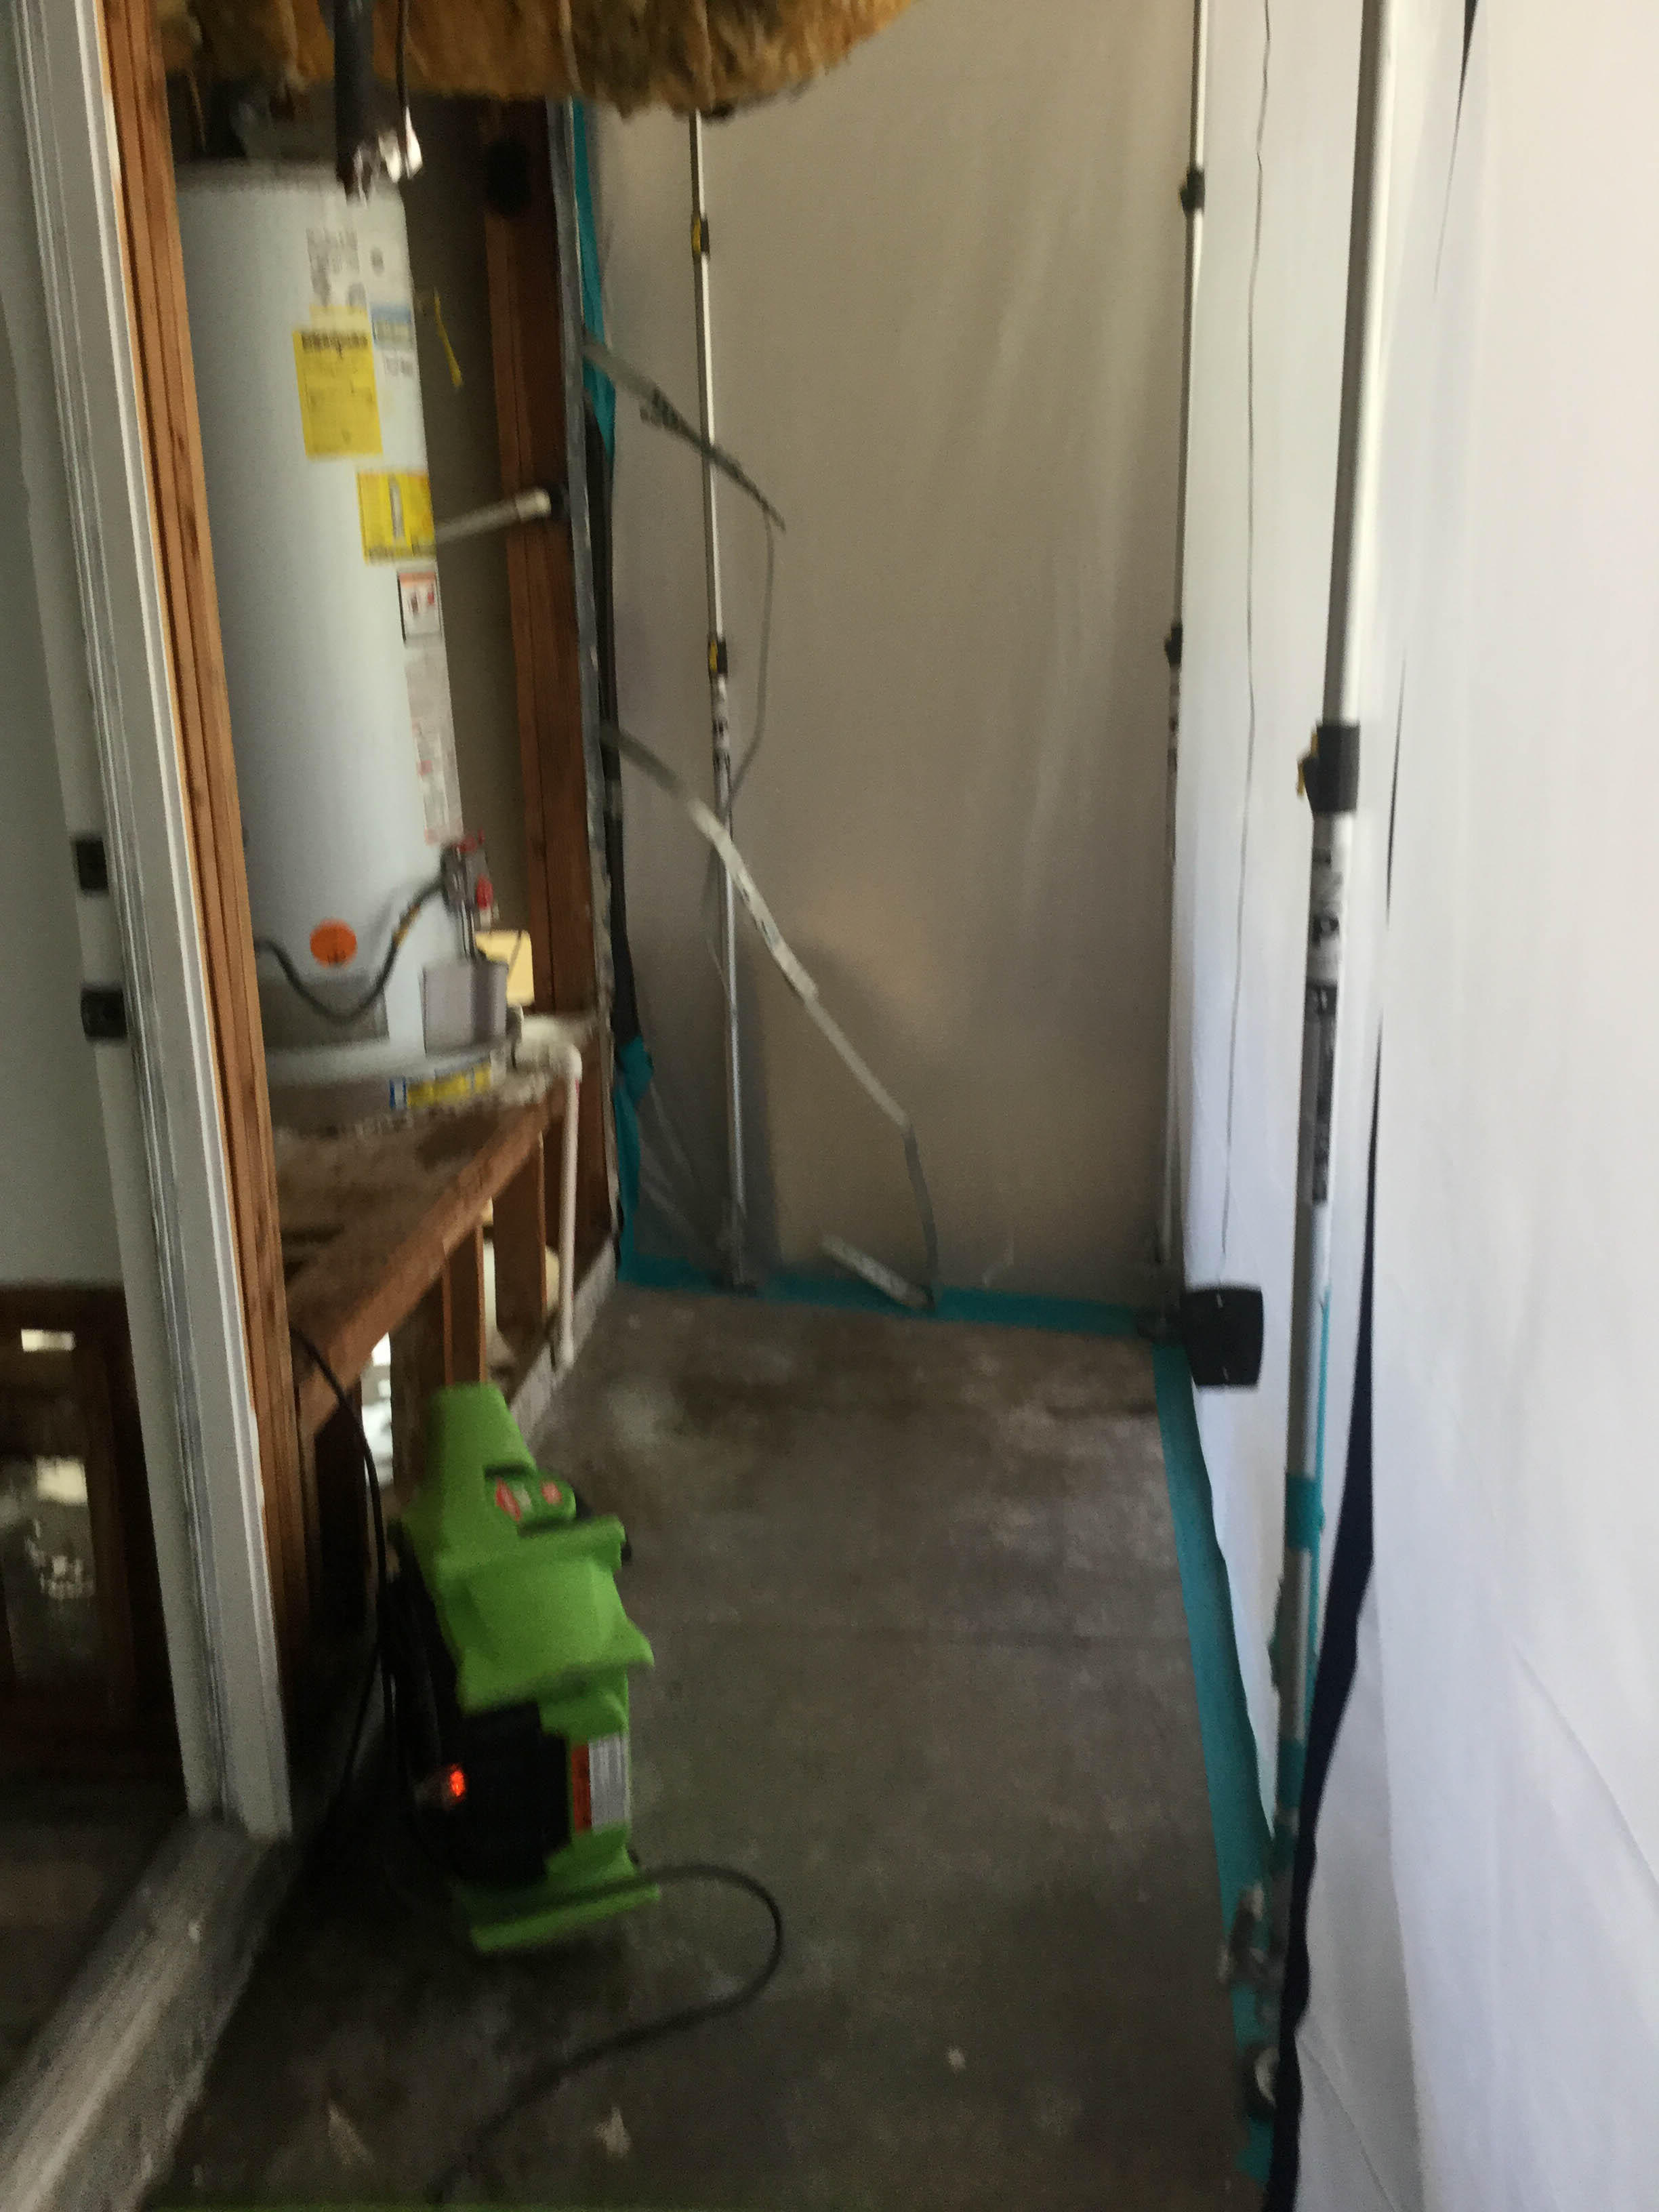 Have Water or Flood Damage?
Call Us Today – (714) 533-1989